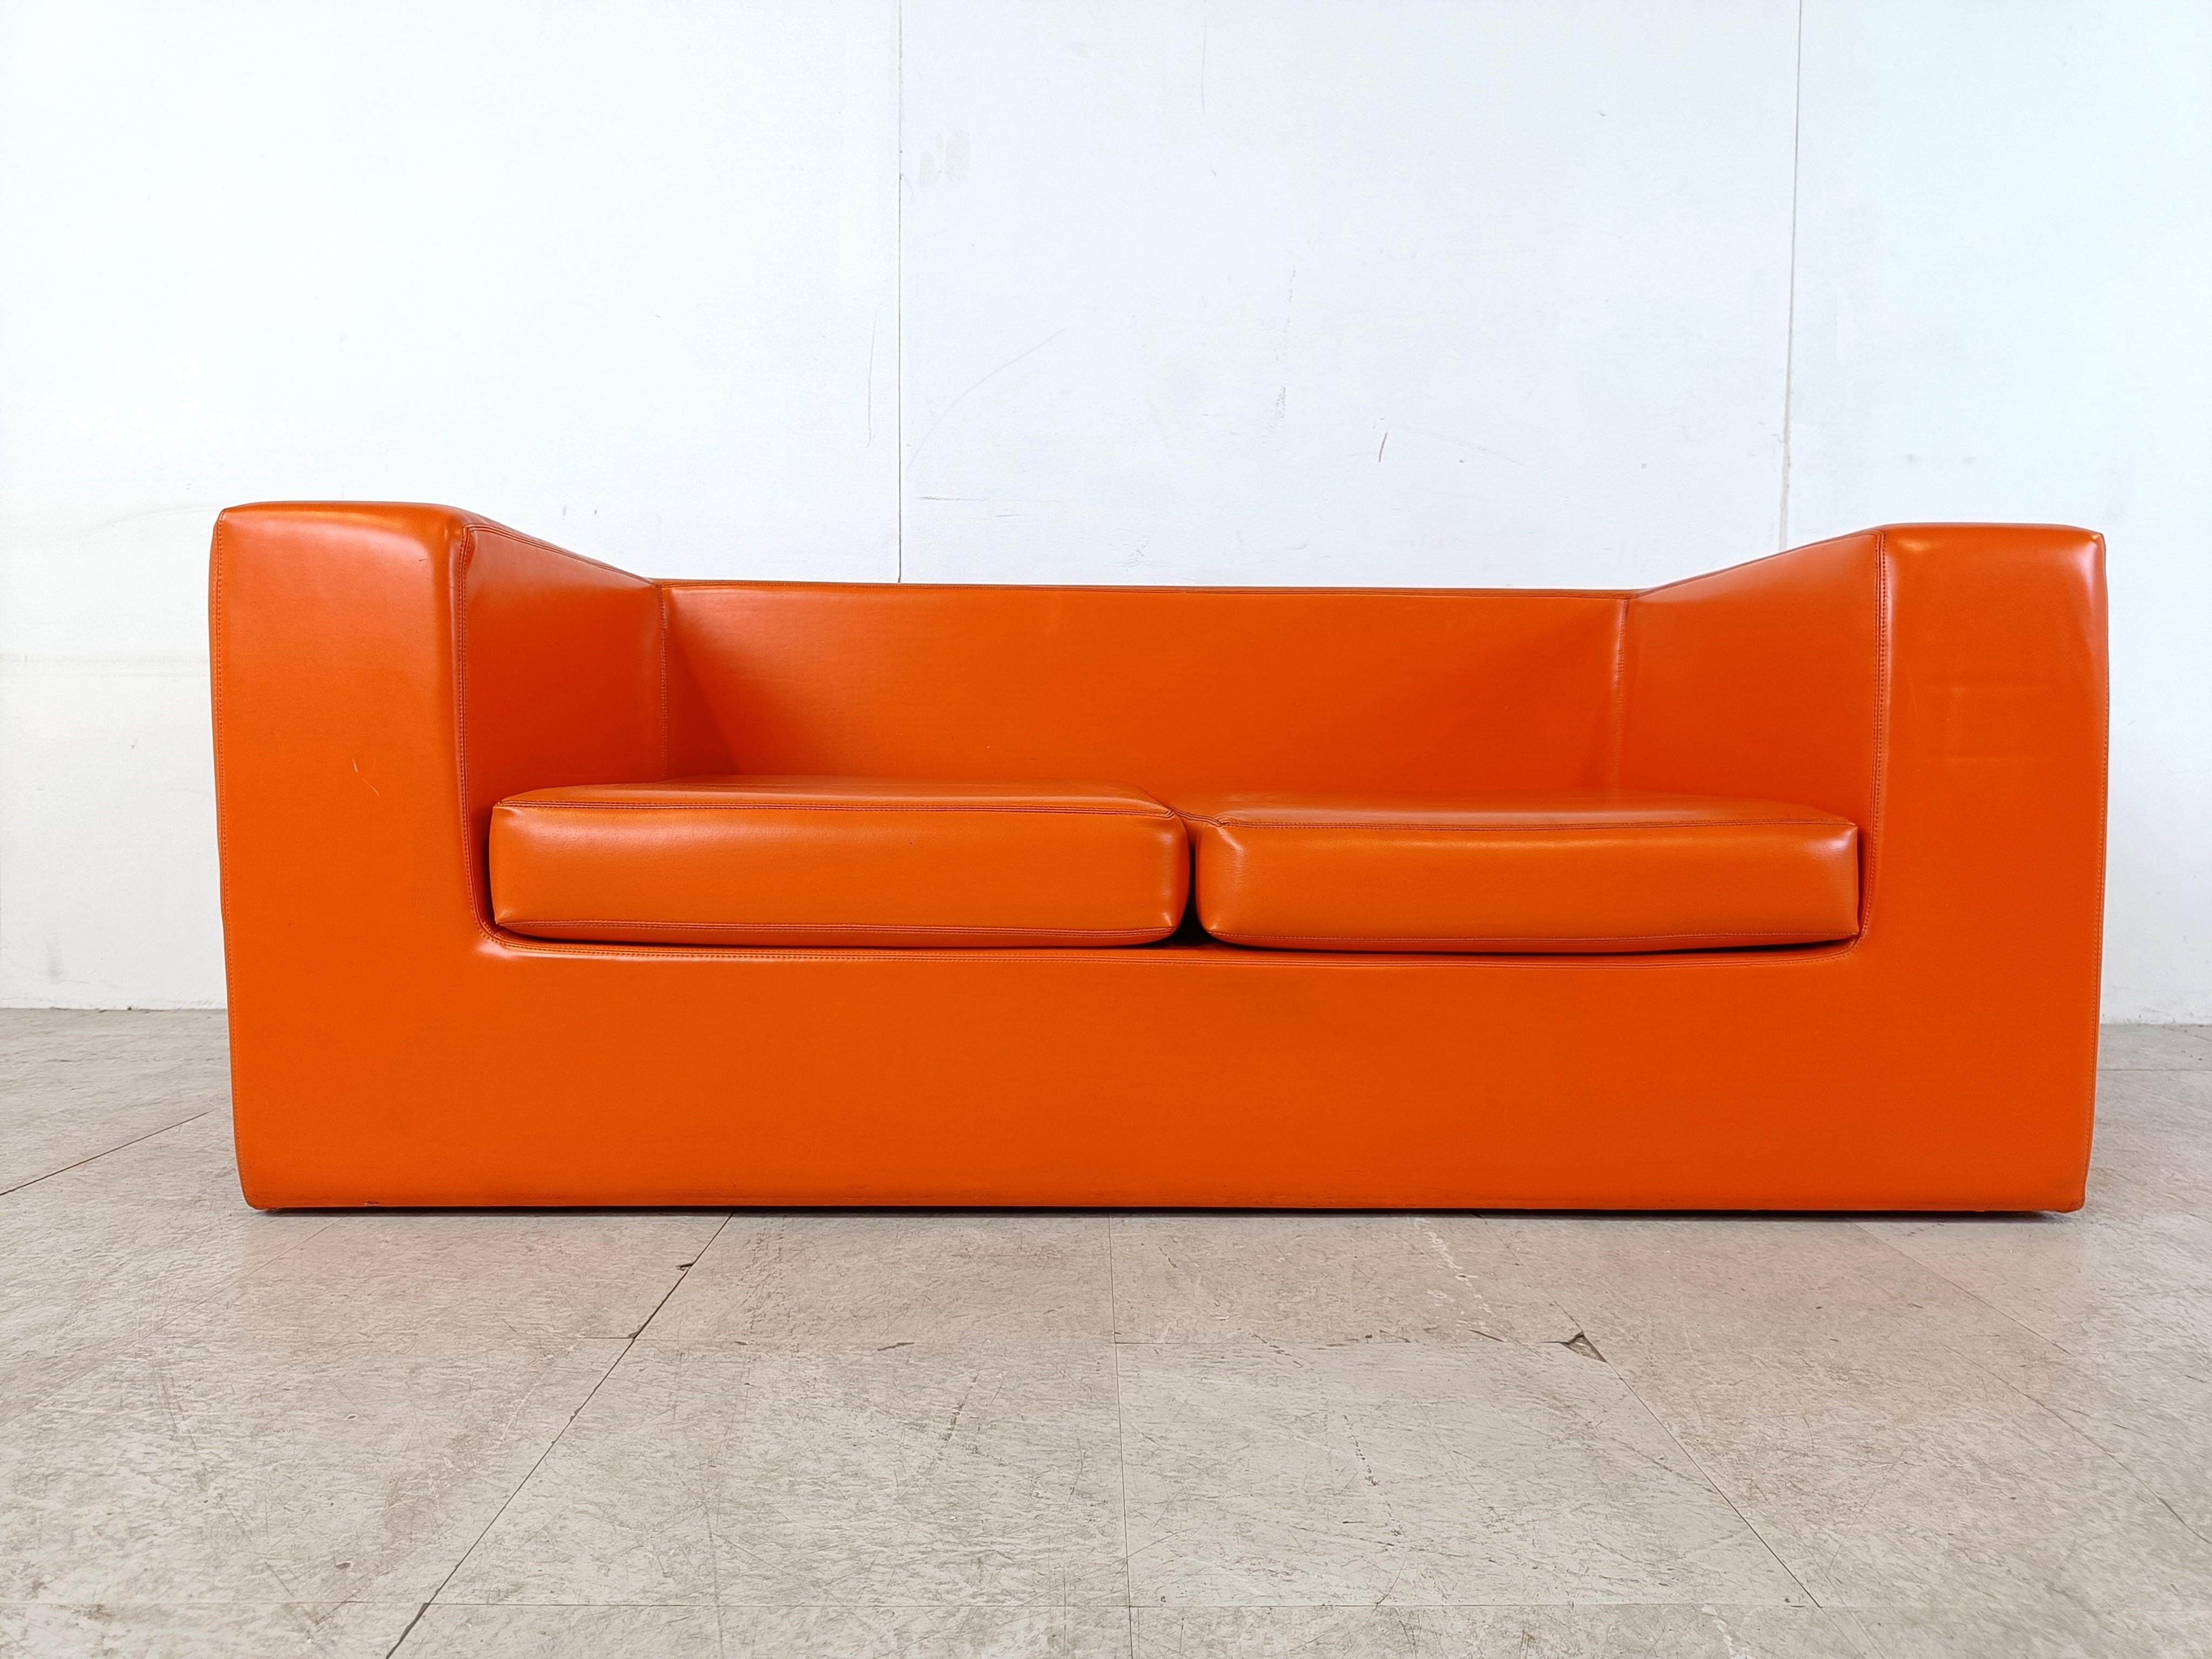 The Throw-Away sofa was designed by Willie Landels for Zanotta in 1965. 

Its he first sofa  completely made from expanded polyurethane, structureless and industrially made. 

It is a minimalist design but very comfortable. 

Good condition

1970s -